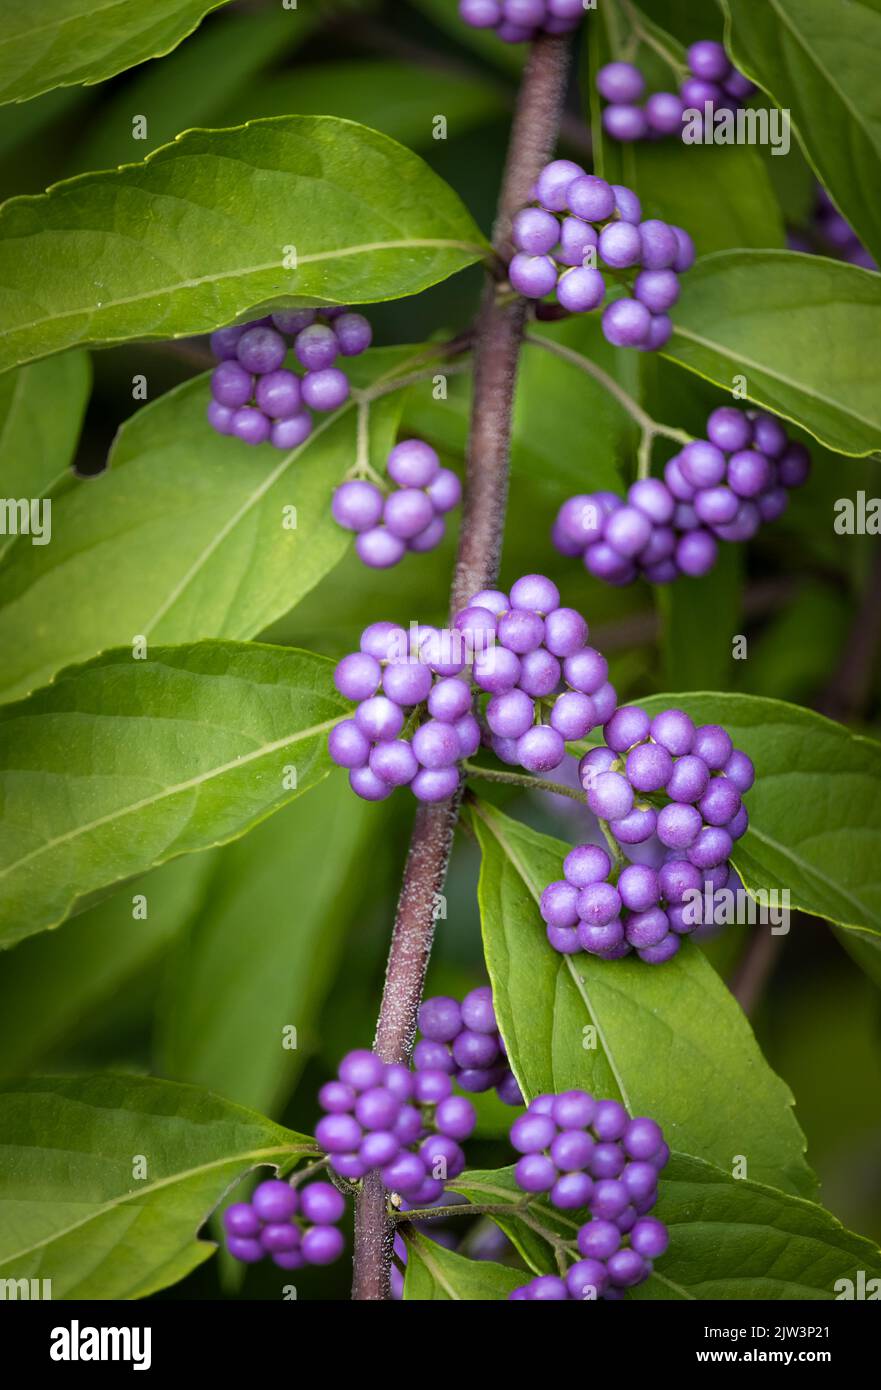 Clusters of purple Japanese Beautyberry fruit or drupe, Callicarpa japonica, on lush green foliage in summer or fall, Lancaster, Pennsylvania Stock Photo